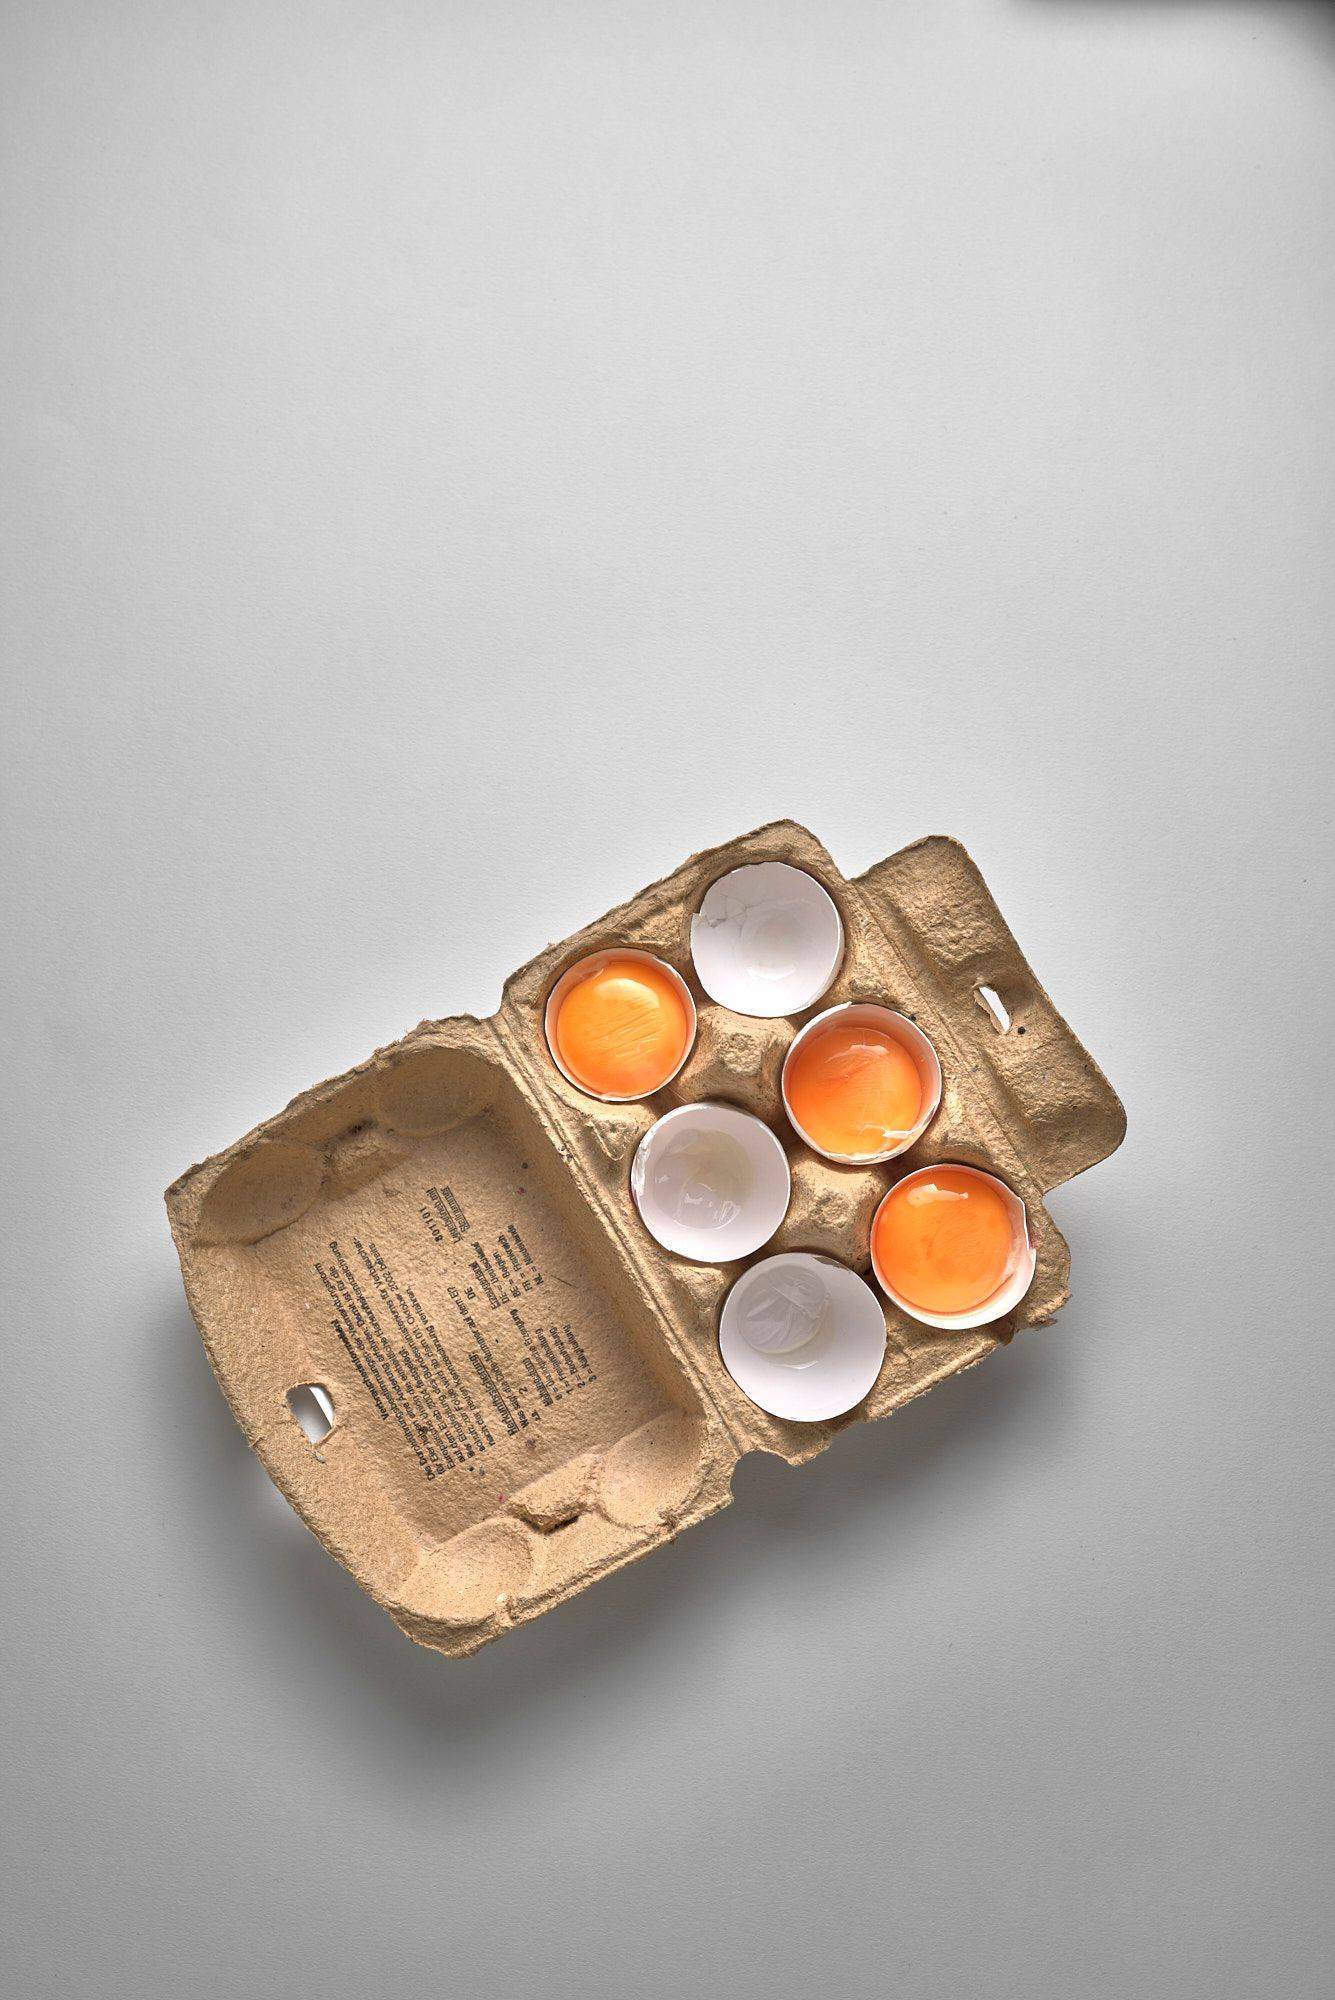 cracked eggs in egg shells with a box on white background